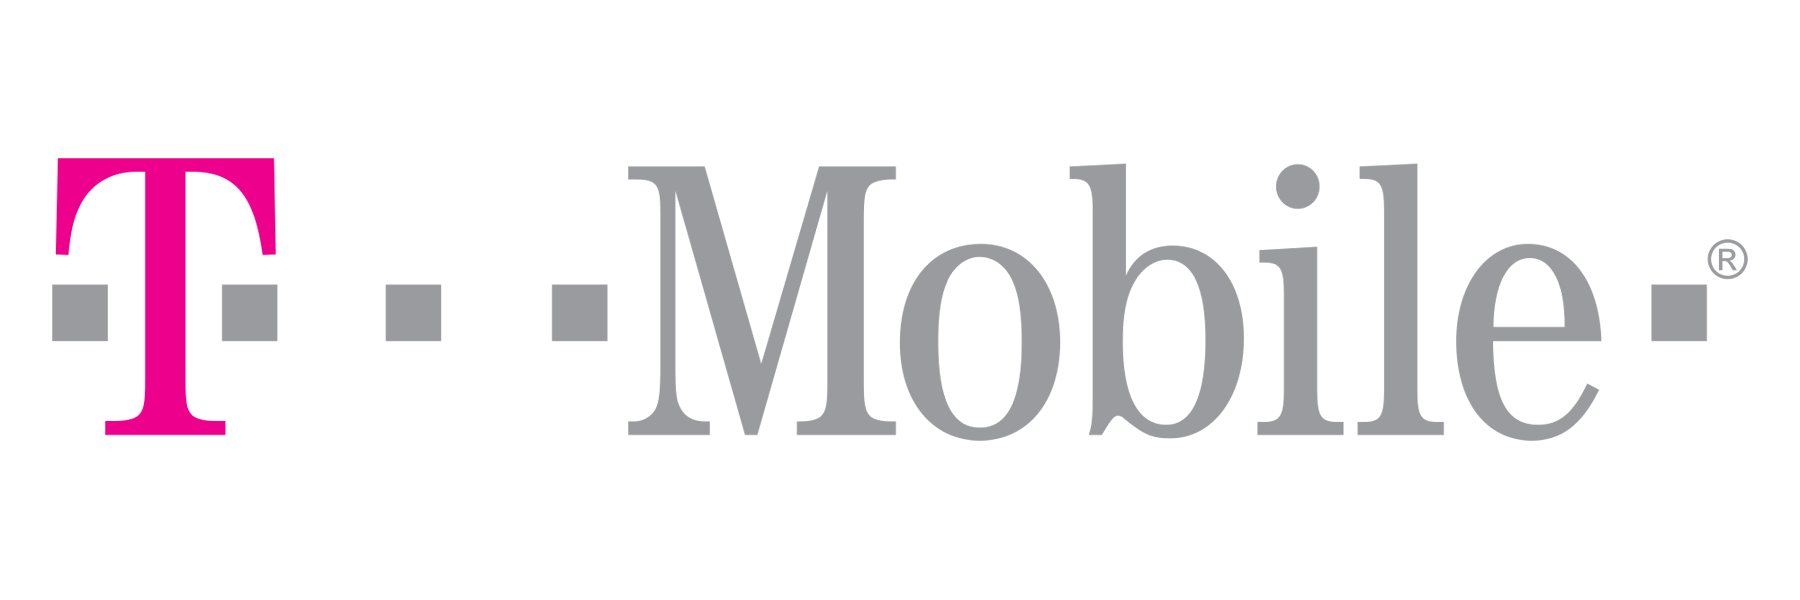 T Company Logo - T-Mobile Logo, T-Mobile Symbol, Meaning, History and Evolution